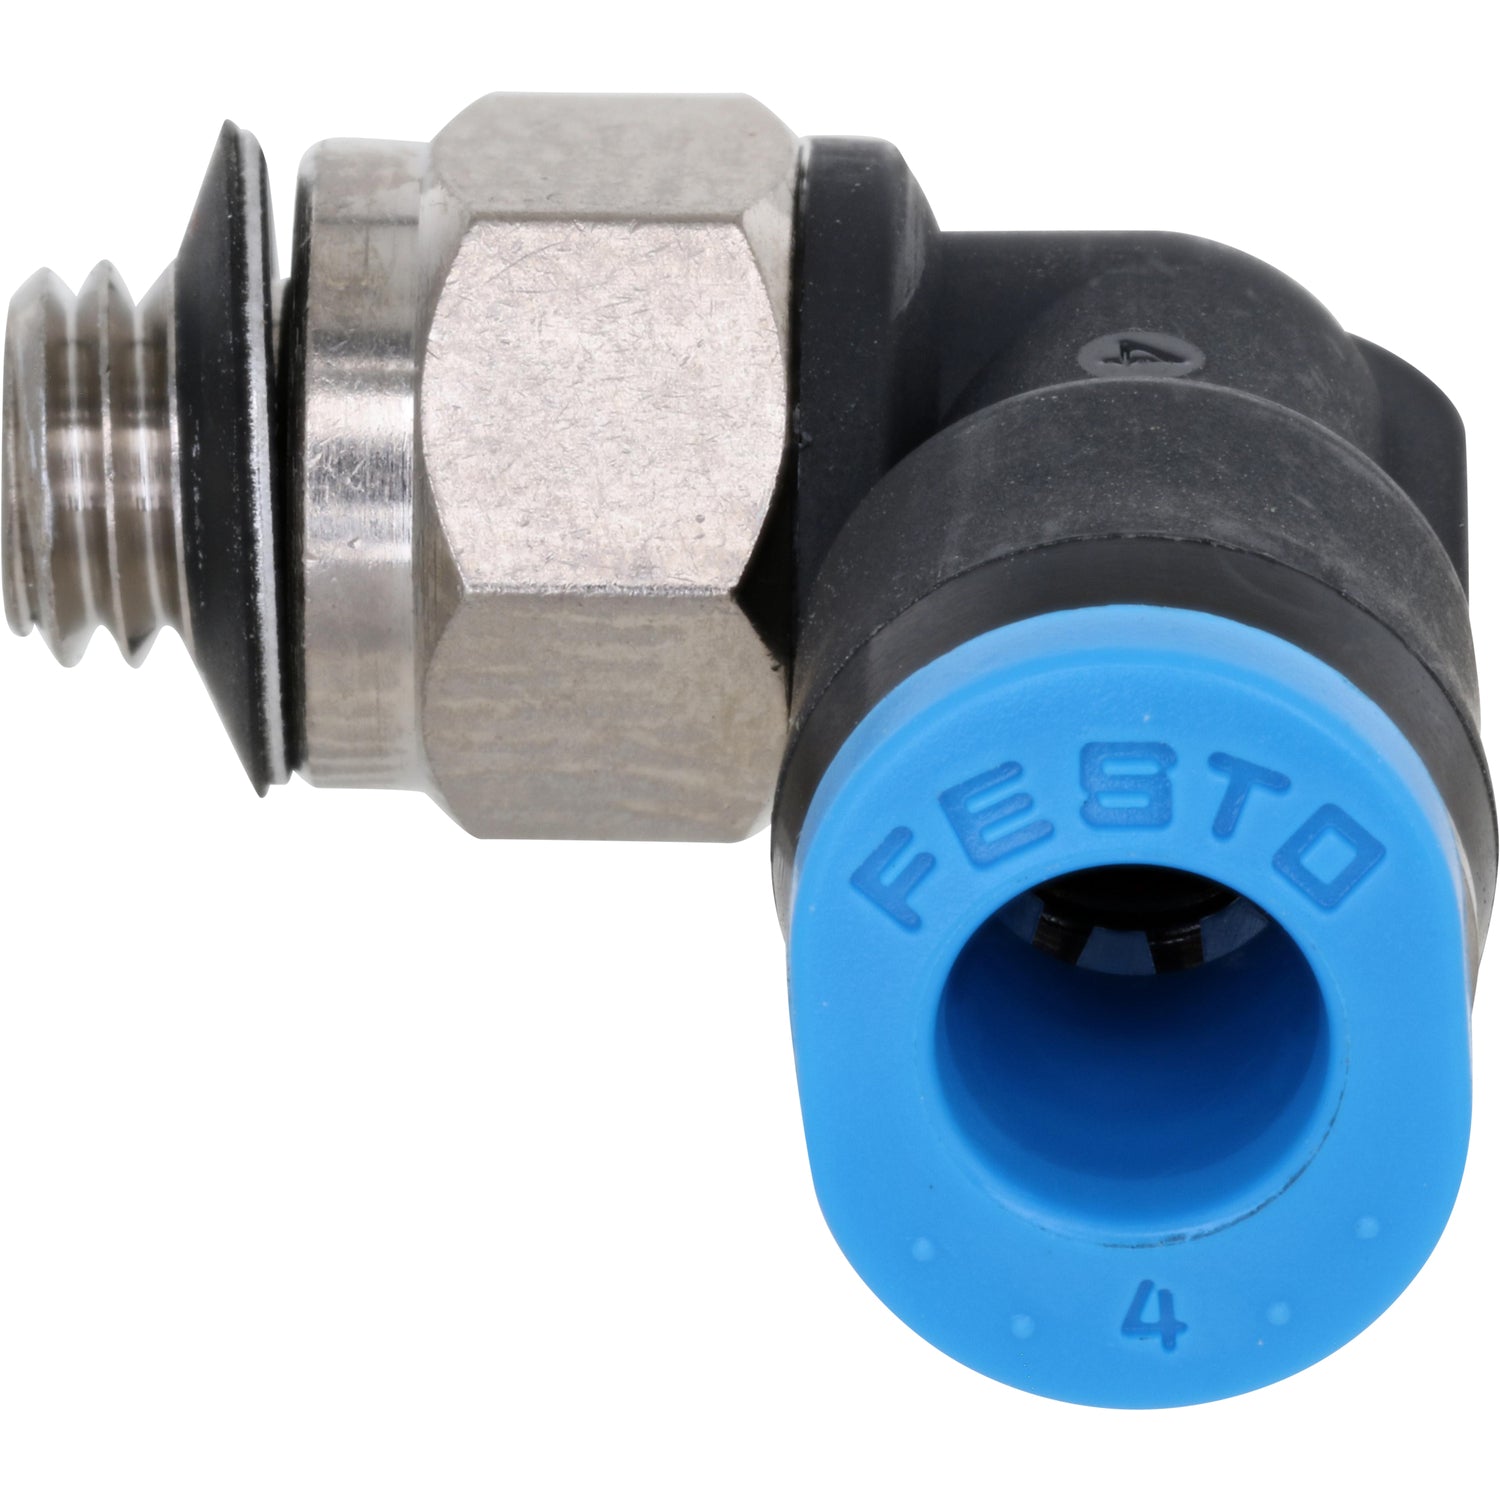 Black and blue L shaped push connect fitting with stainless steel mounting flats and M5 threads shown on white background.